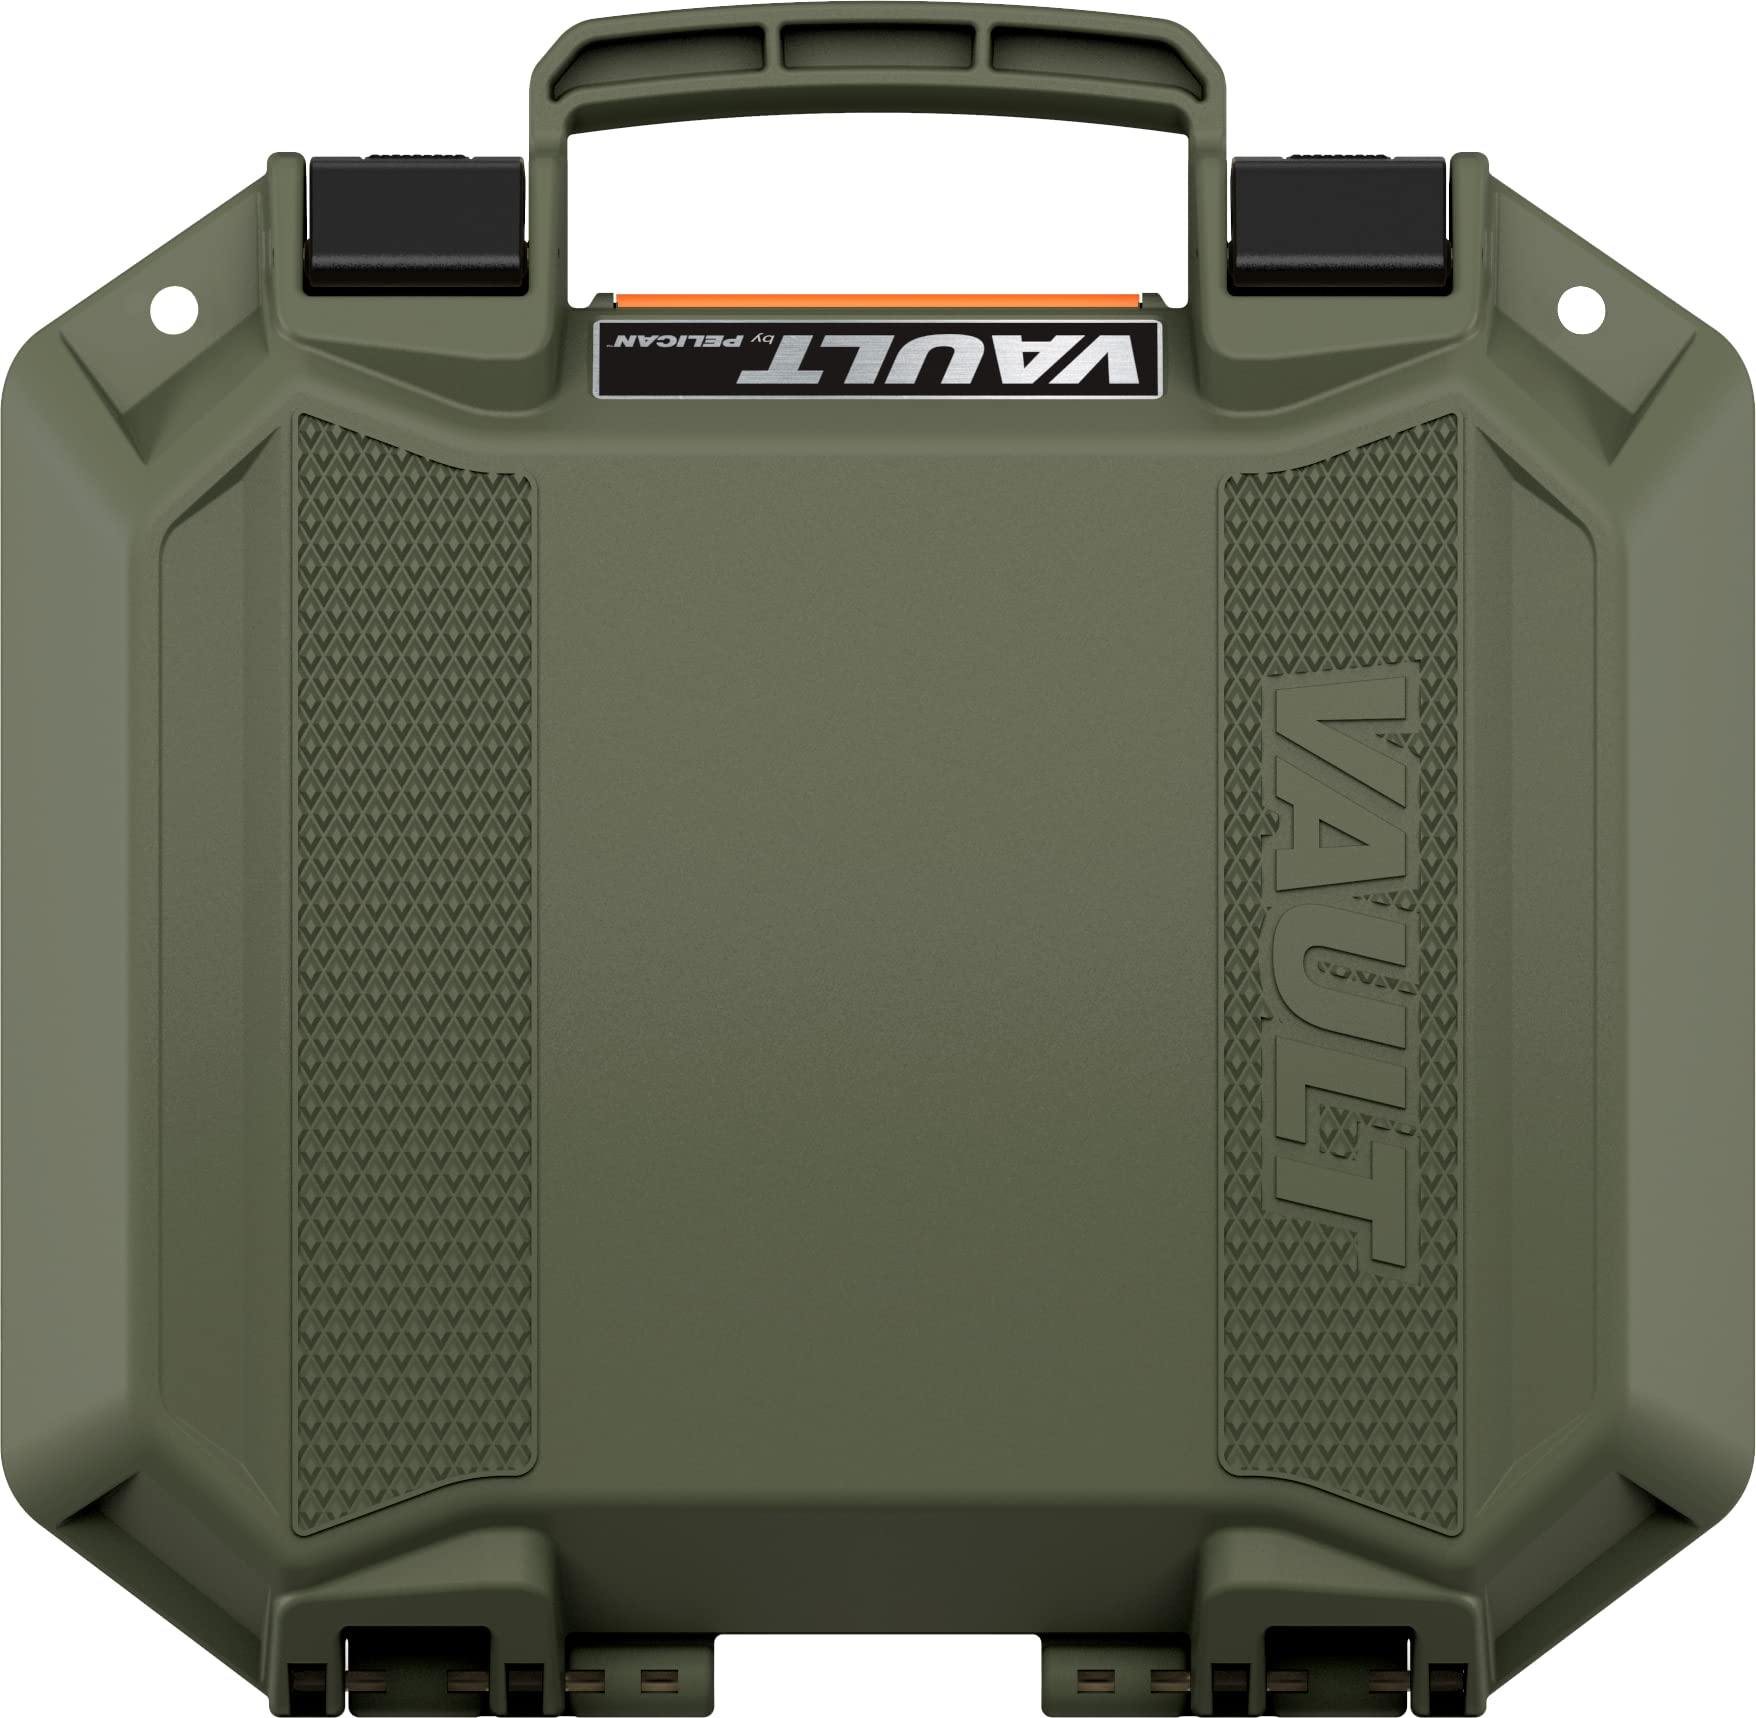 Vault by Pelican - V100 Multi-Purpose Hard Case with Foam for Camera, Drone, Equipment, Electronics, and Gear (OD Green)